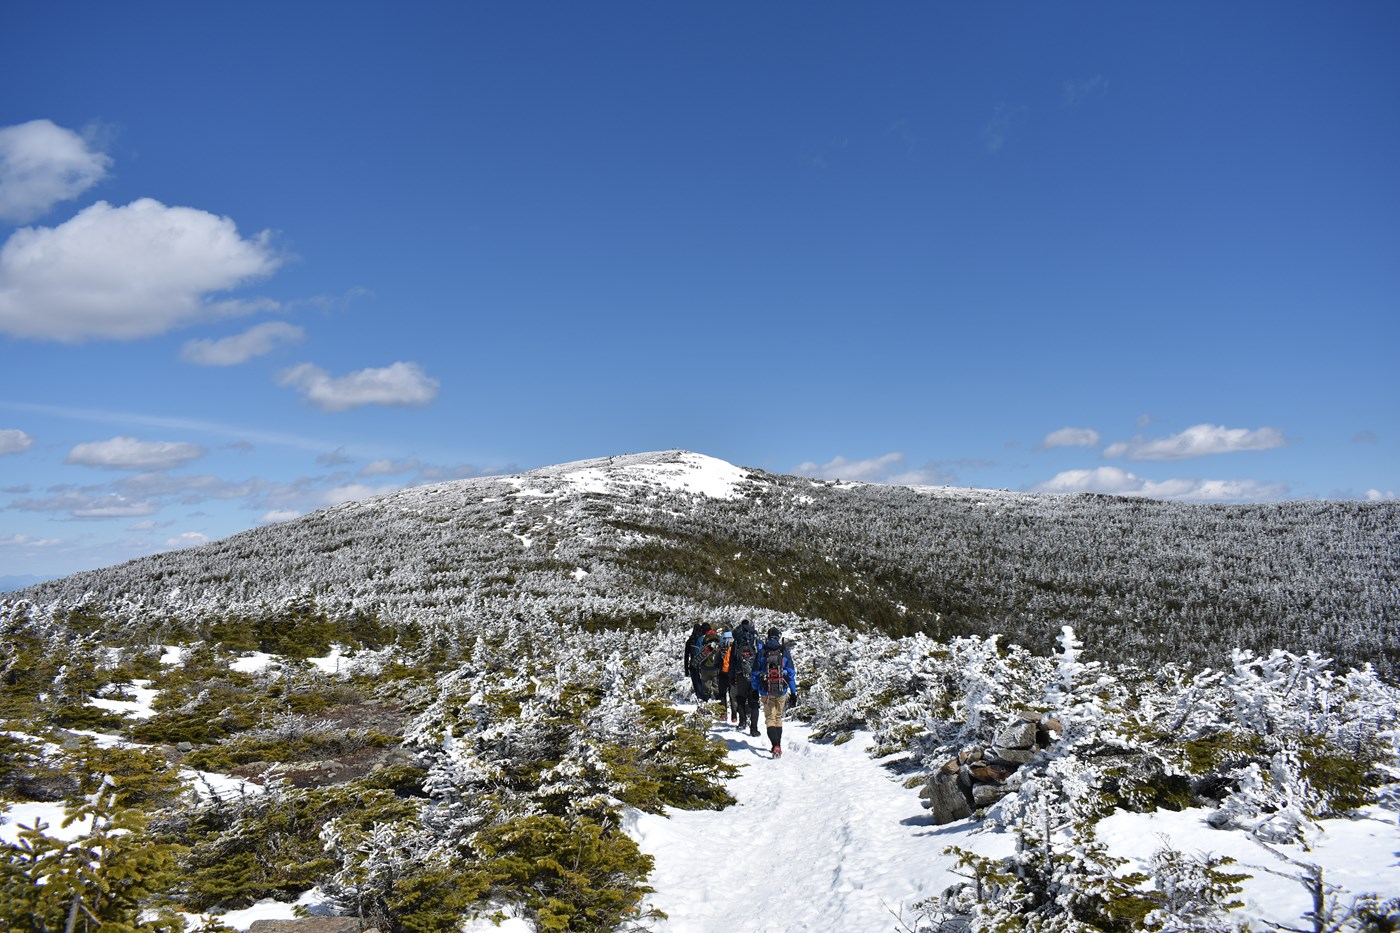 Student walking towards mountain in snow on outdoor hiking trip.